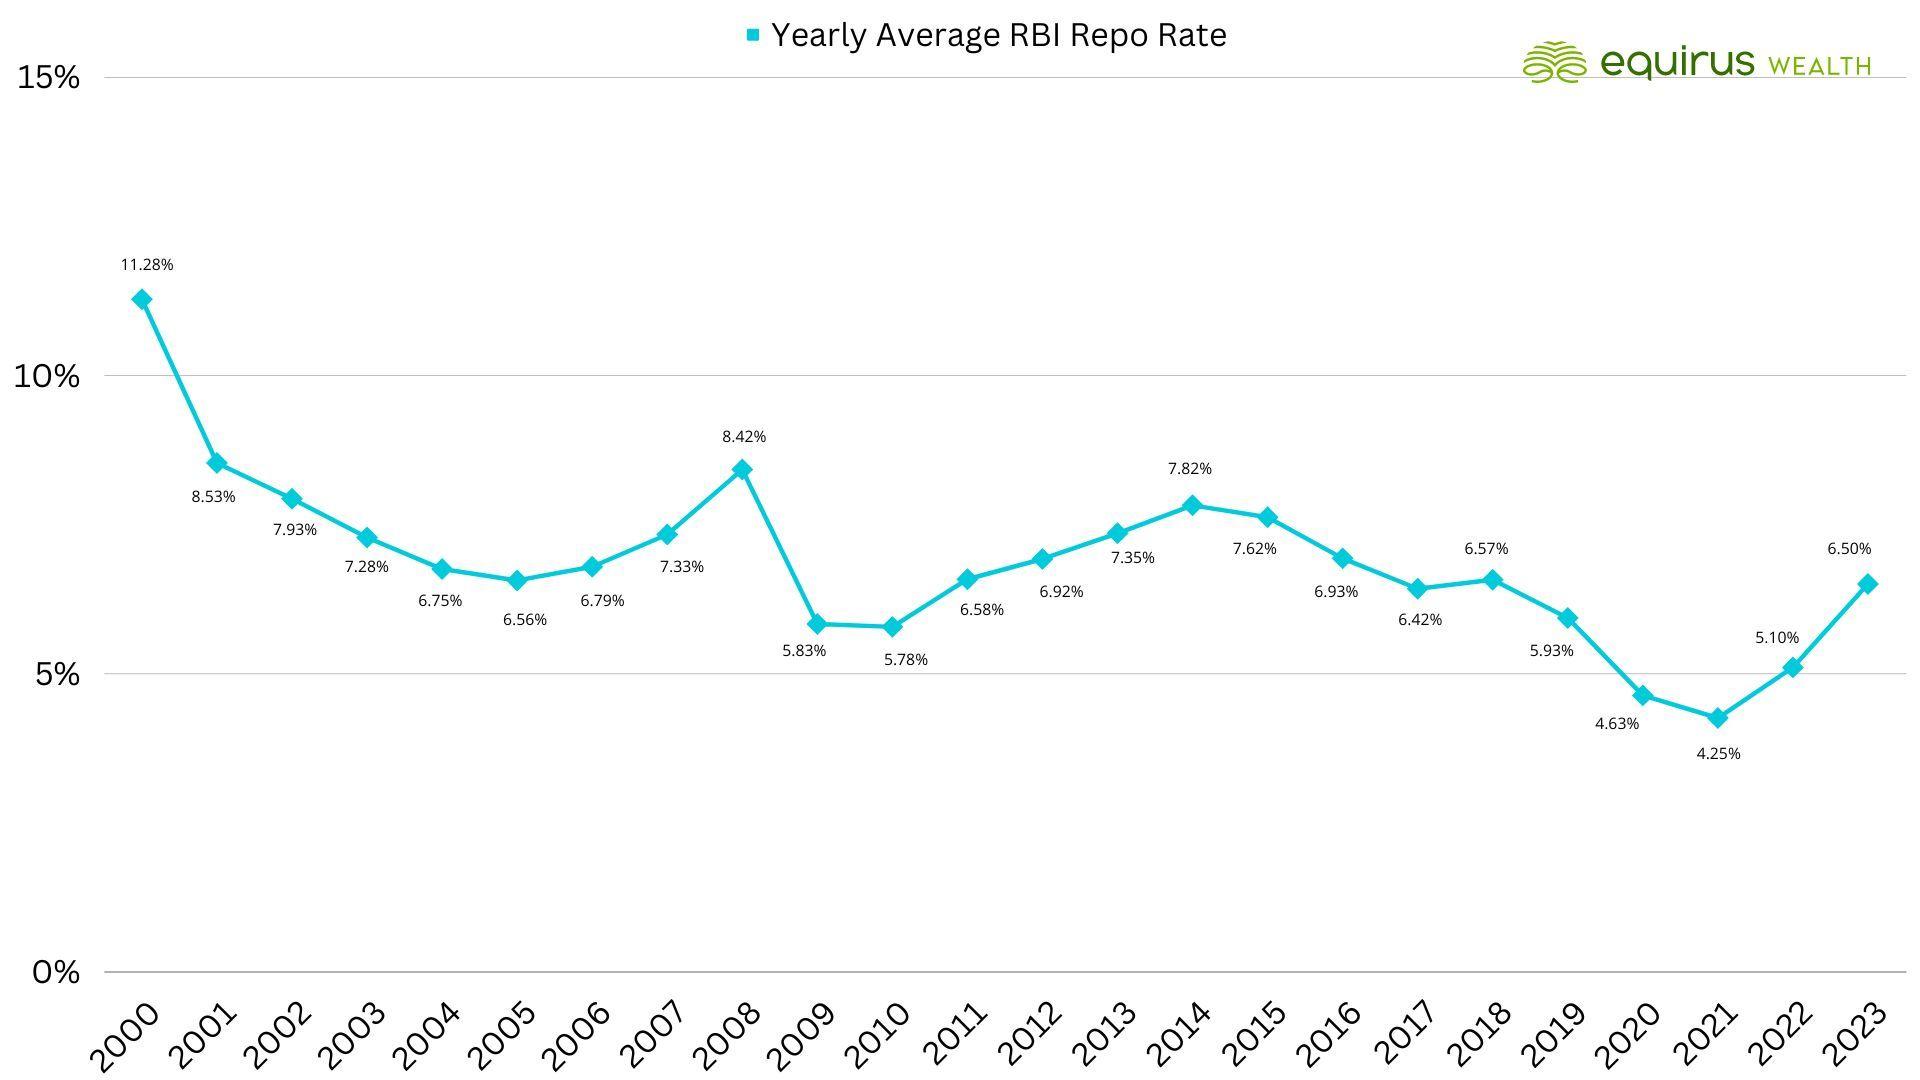 Yearly Average RBI Repo Rate